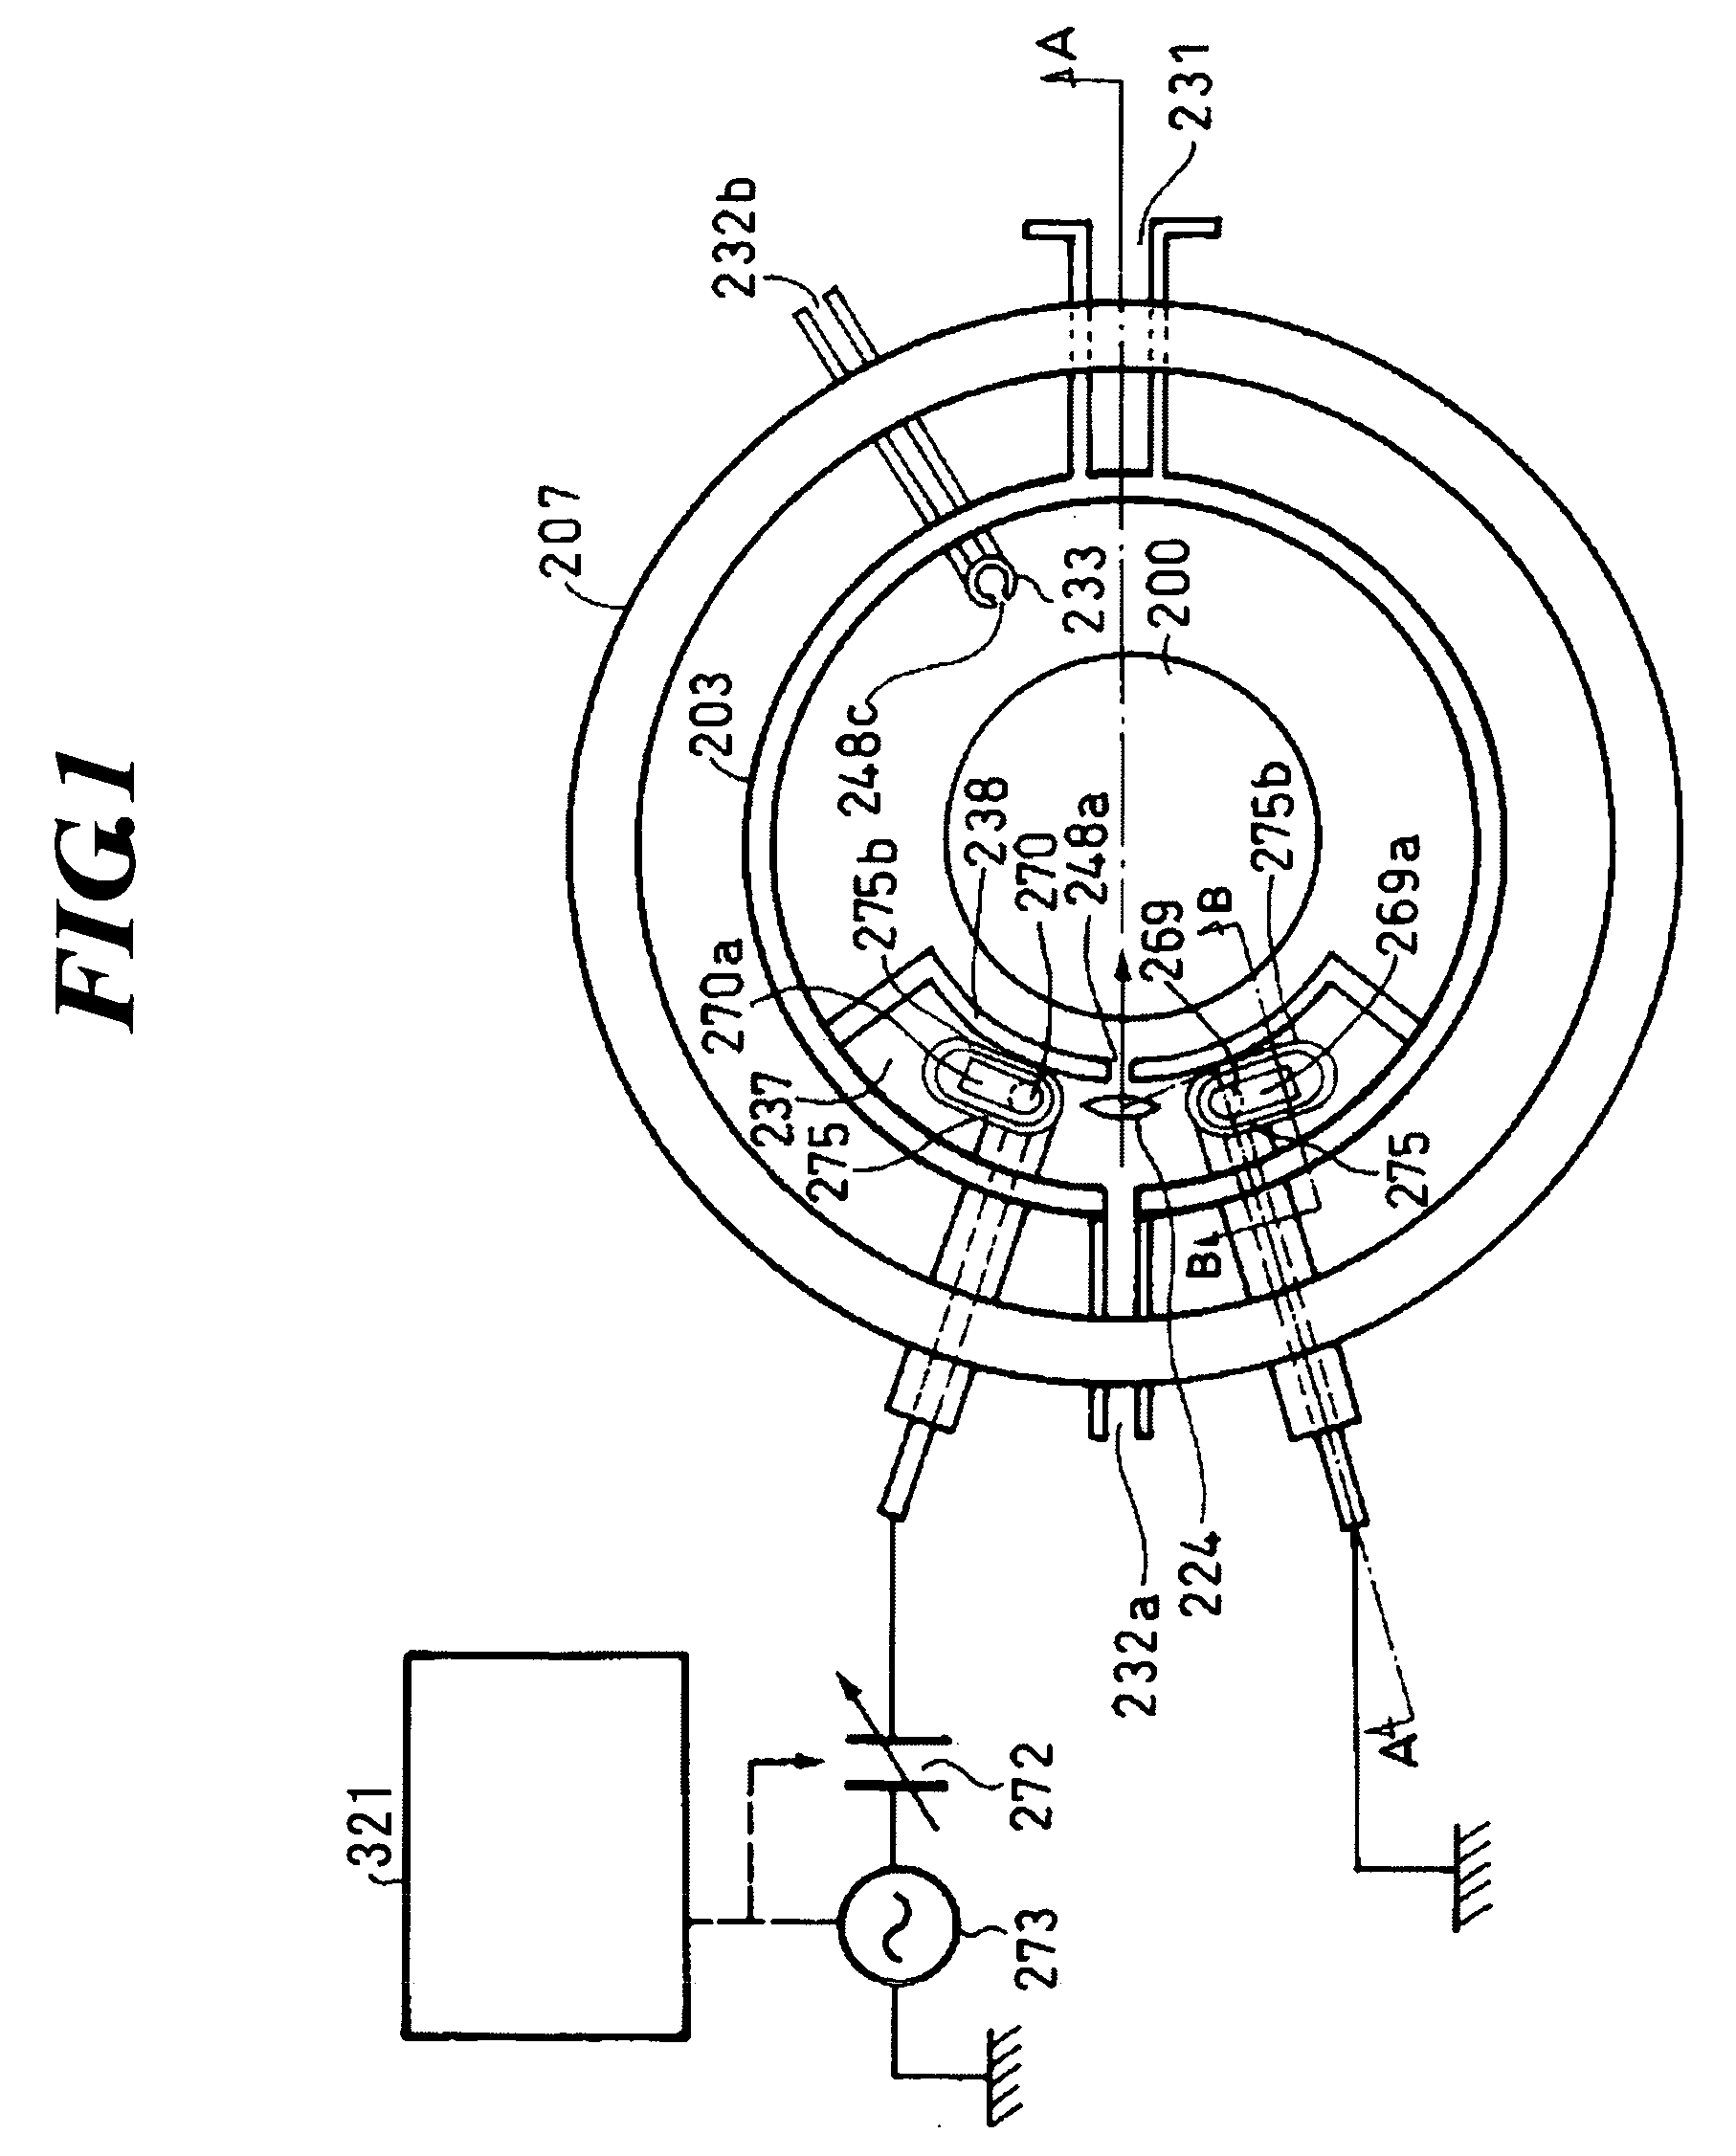 Substrate Processing Apparatus